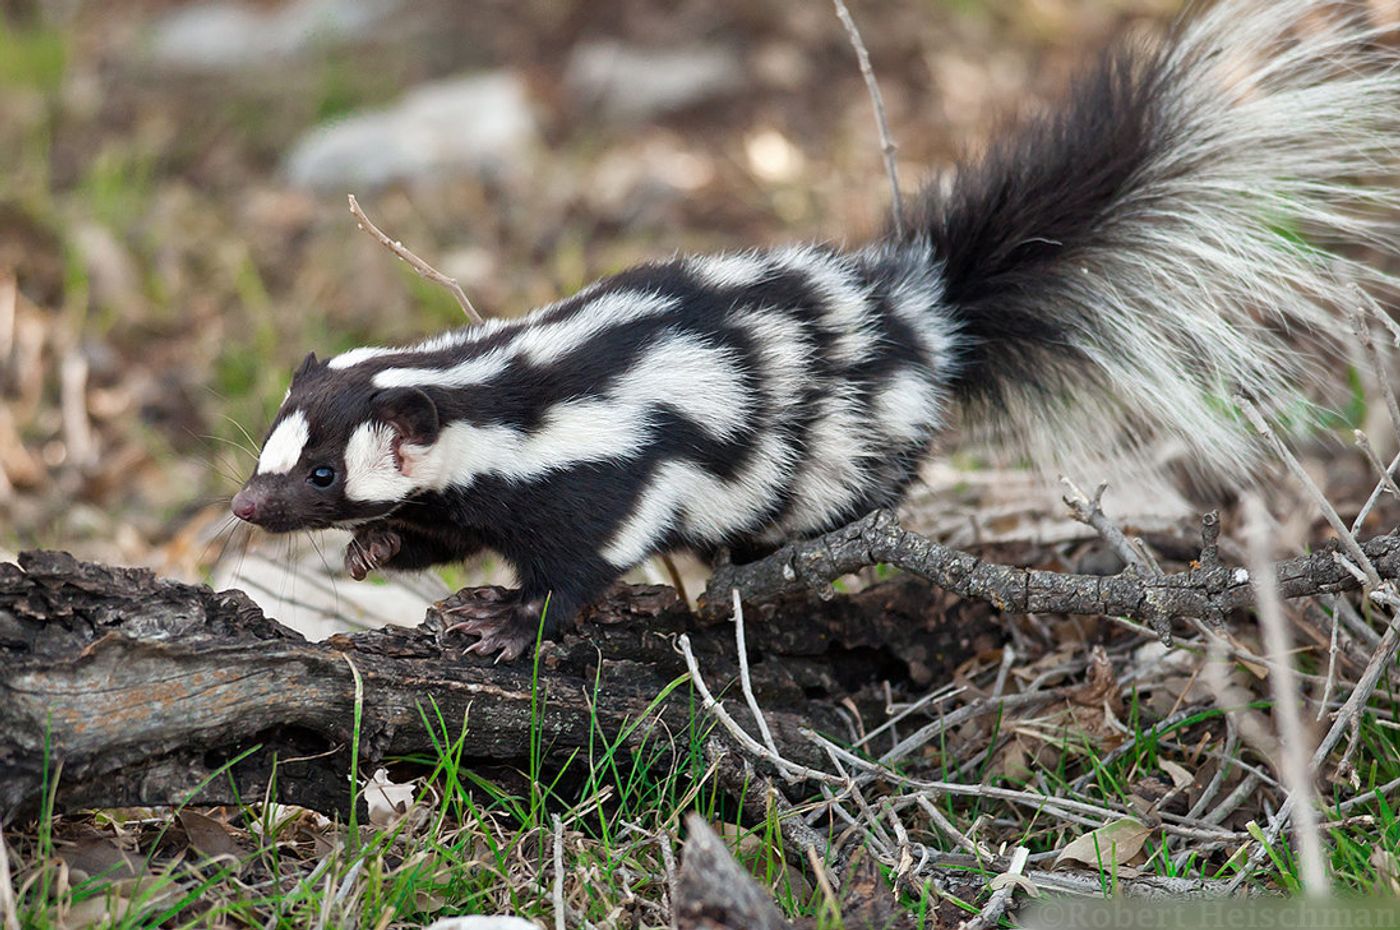 The Western spotted skunk could teach us more about how climate change impacts the evolution of animal species.